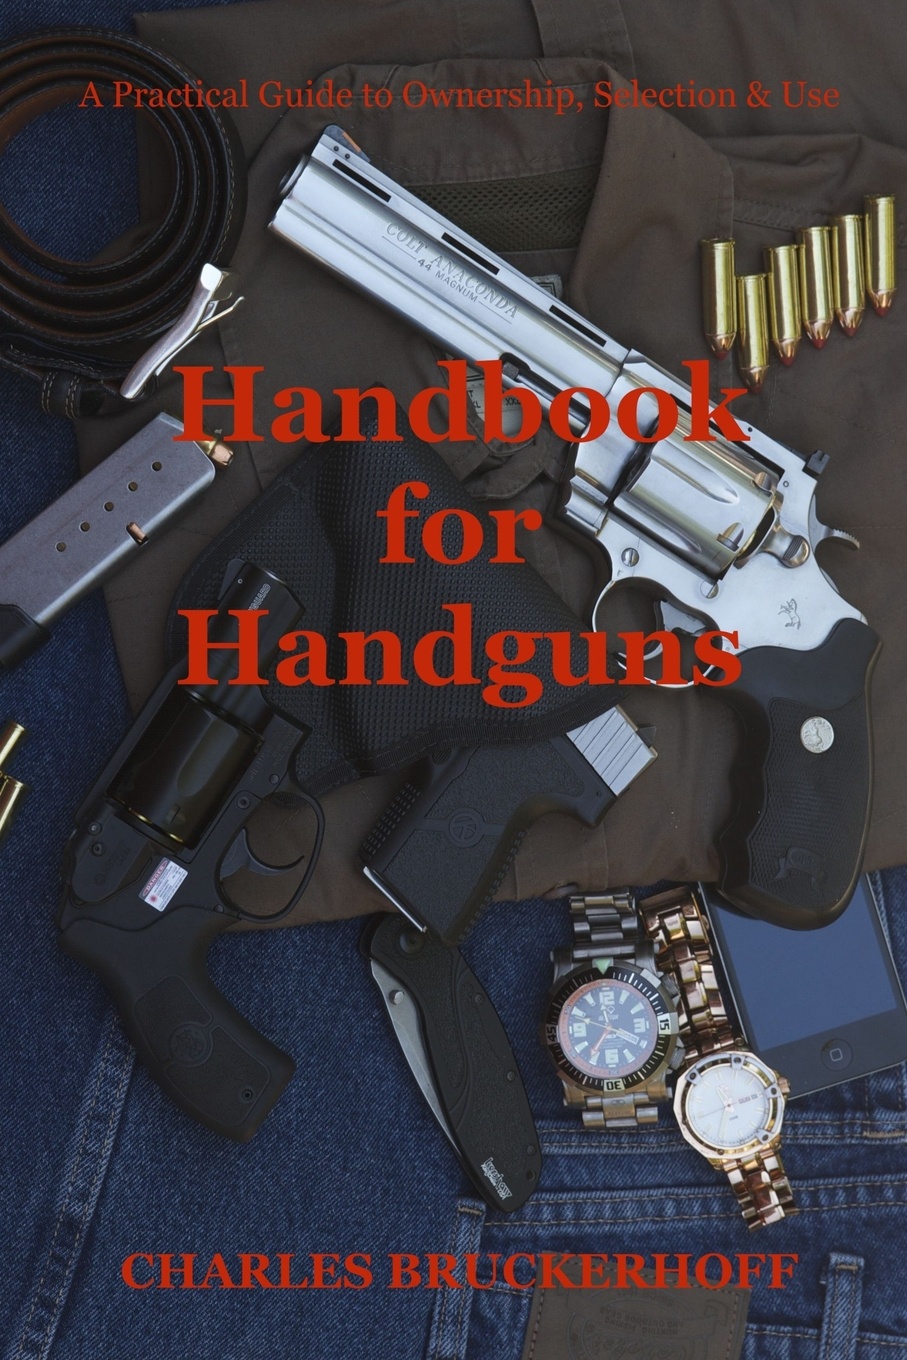 Handbook for Handguns. A Practical Guide to Ownership, Selection & Use